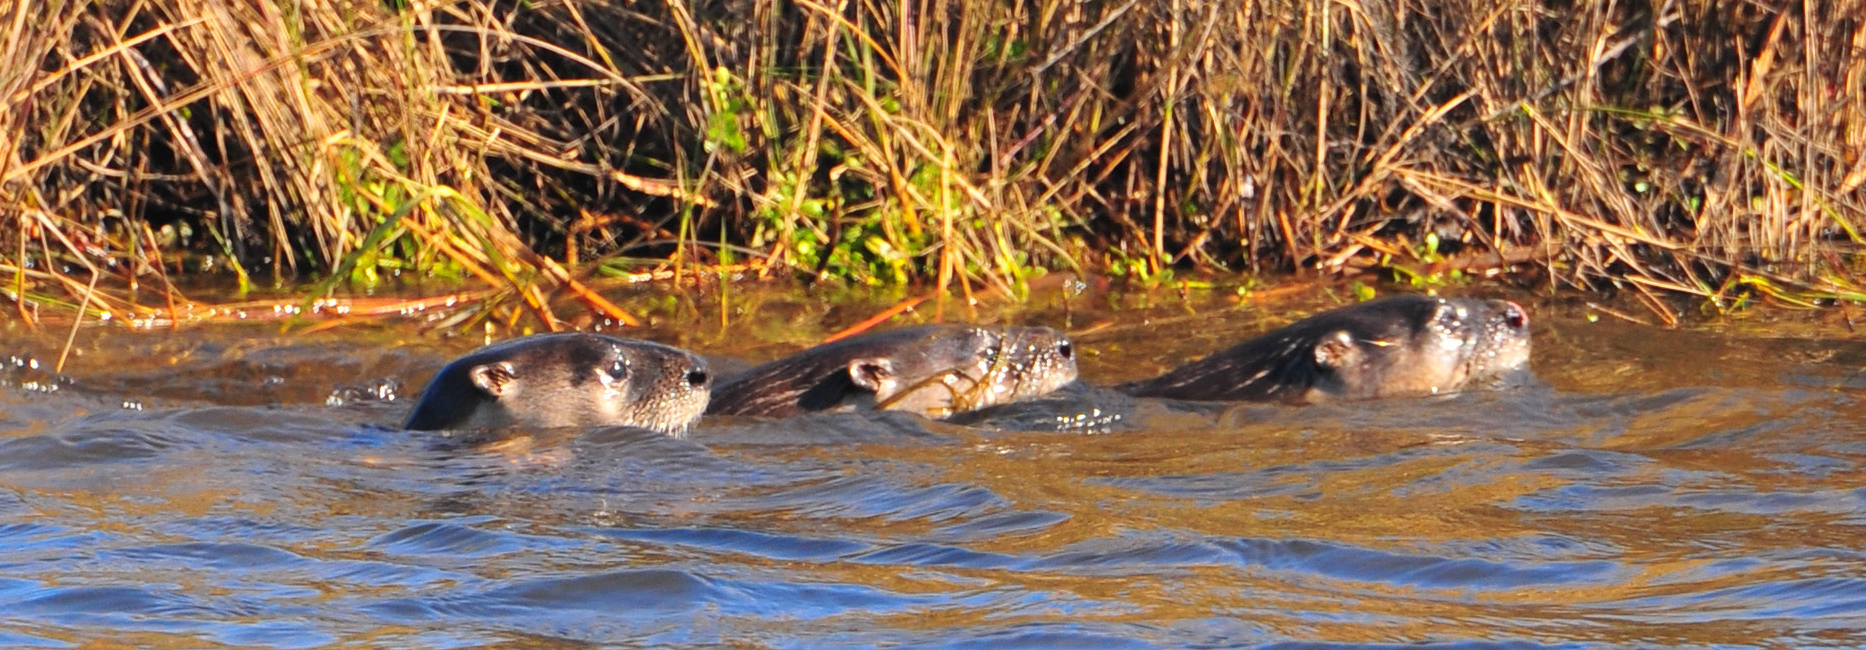 Three river otters swimming in marsh, only heads above water visible